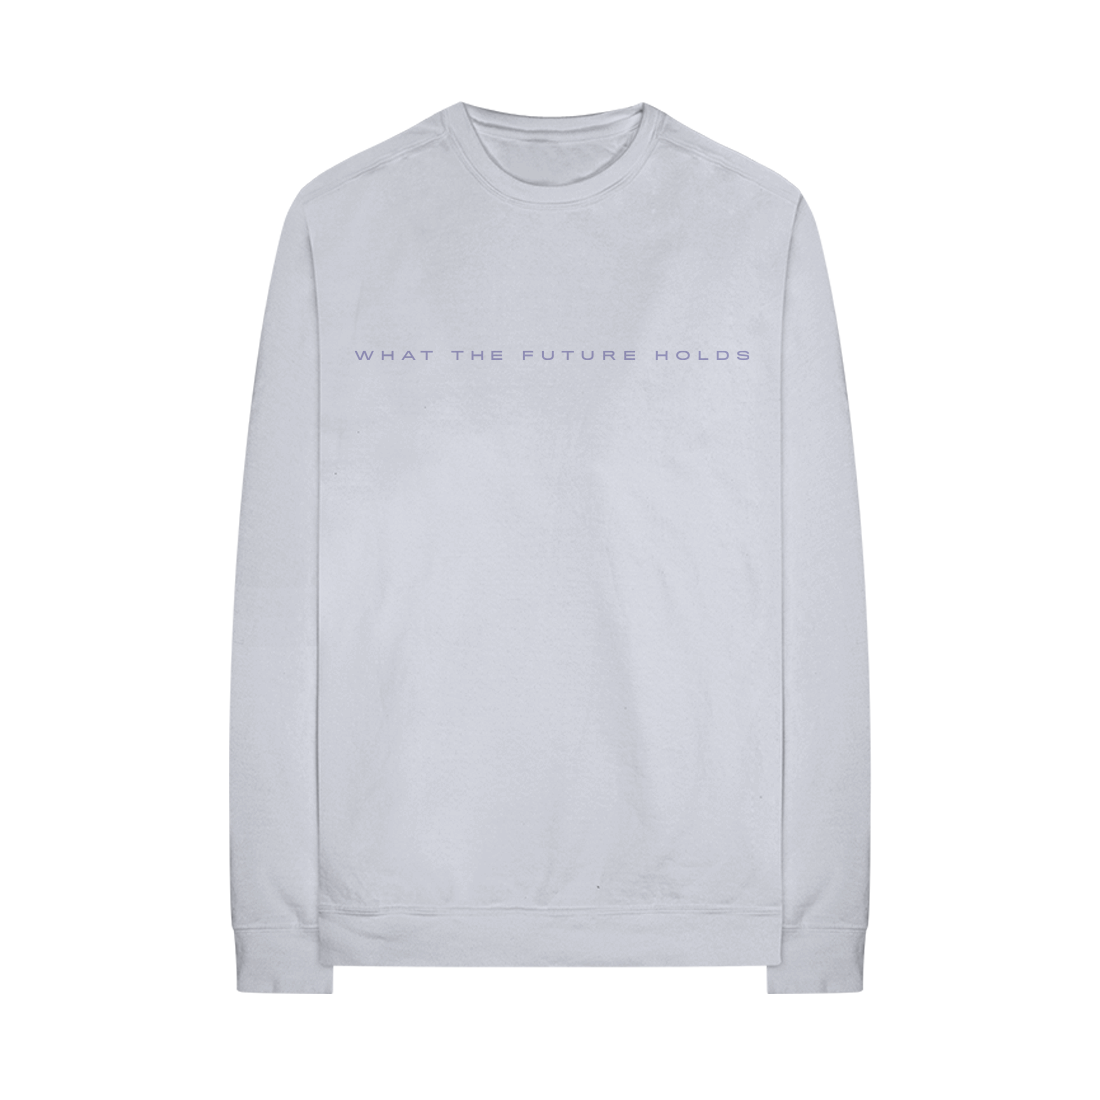 WHAT THE FUTURE HOLDS DELUXE GREY CREWNECK